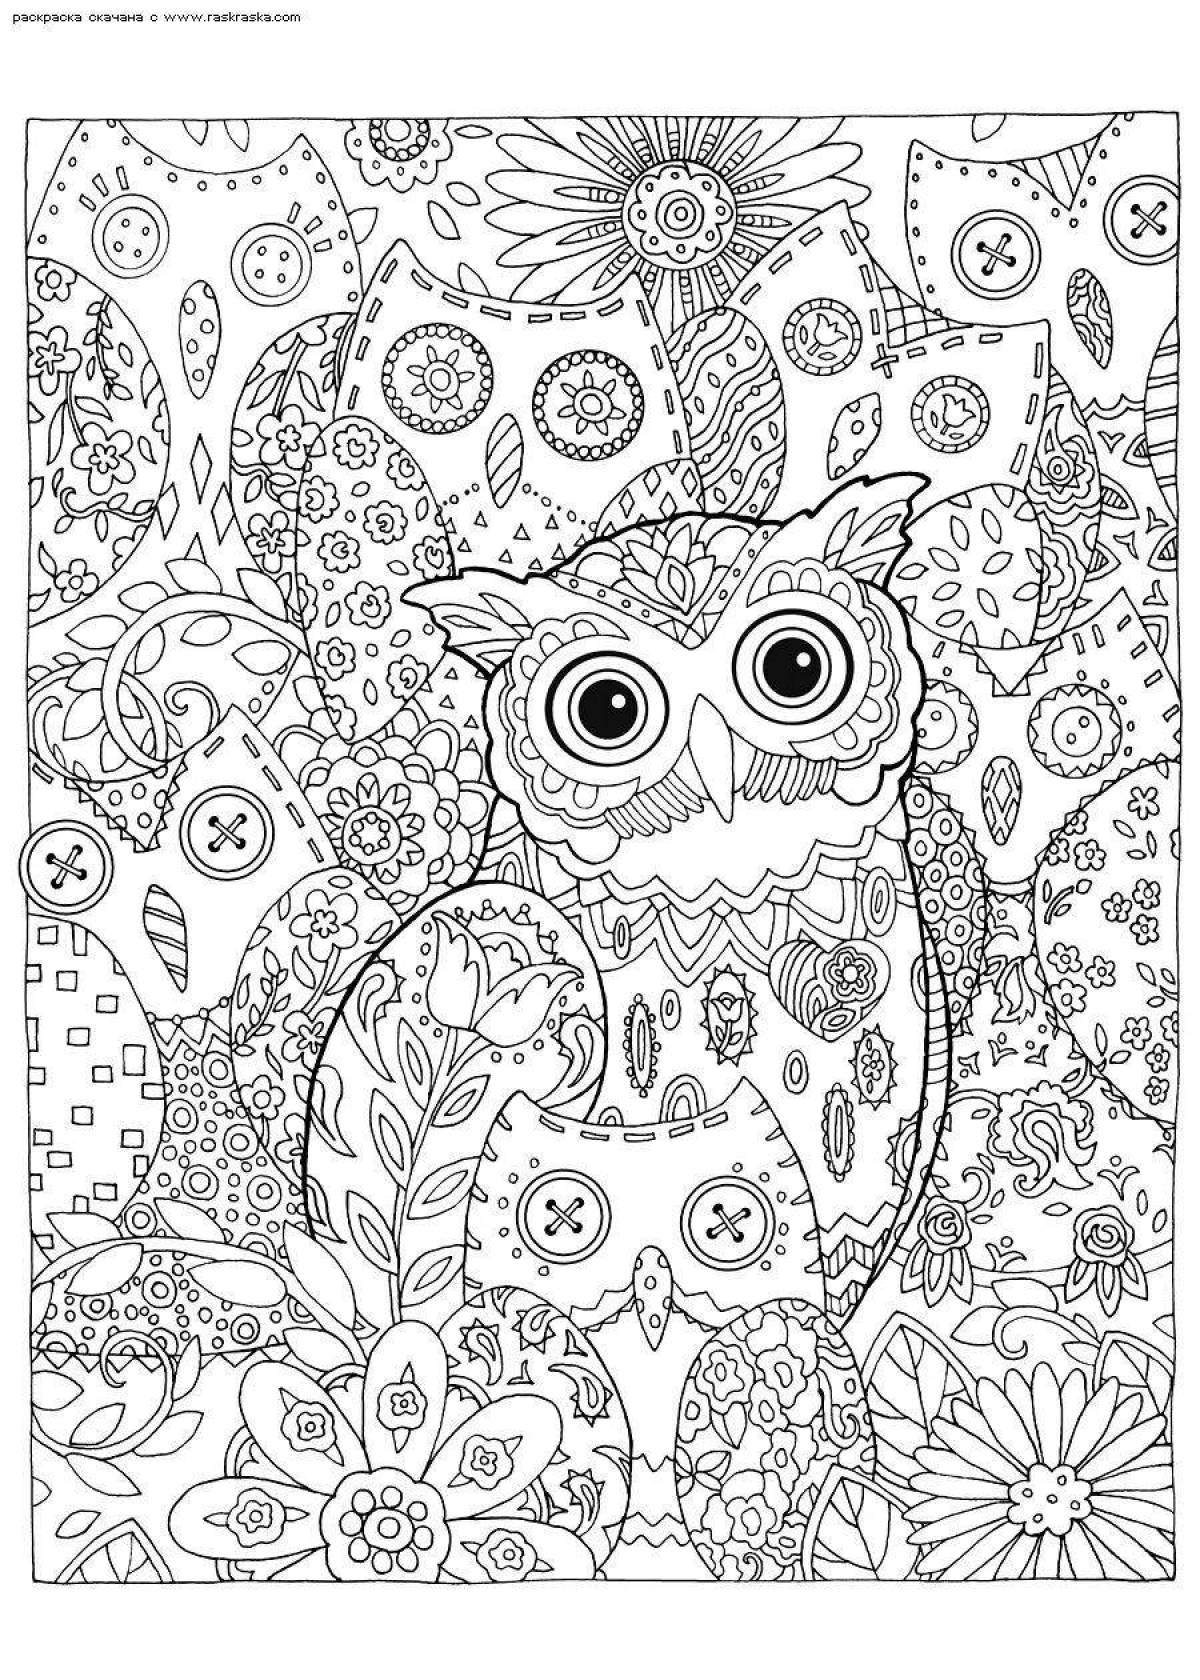 Great complex owl coloring book